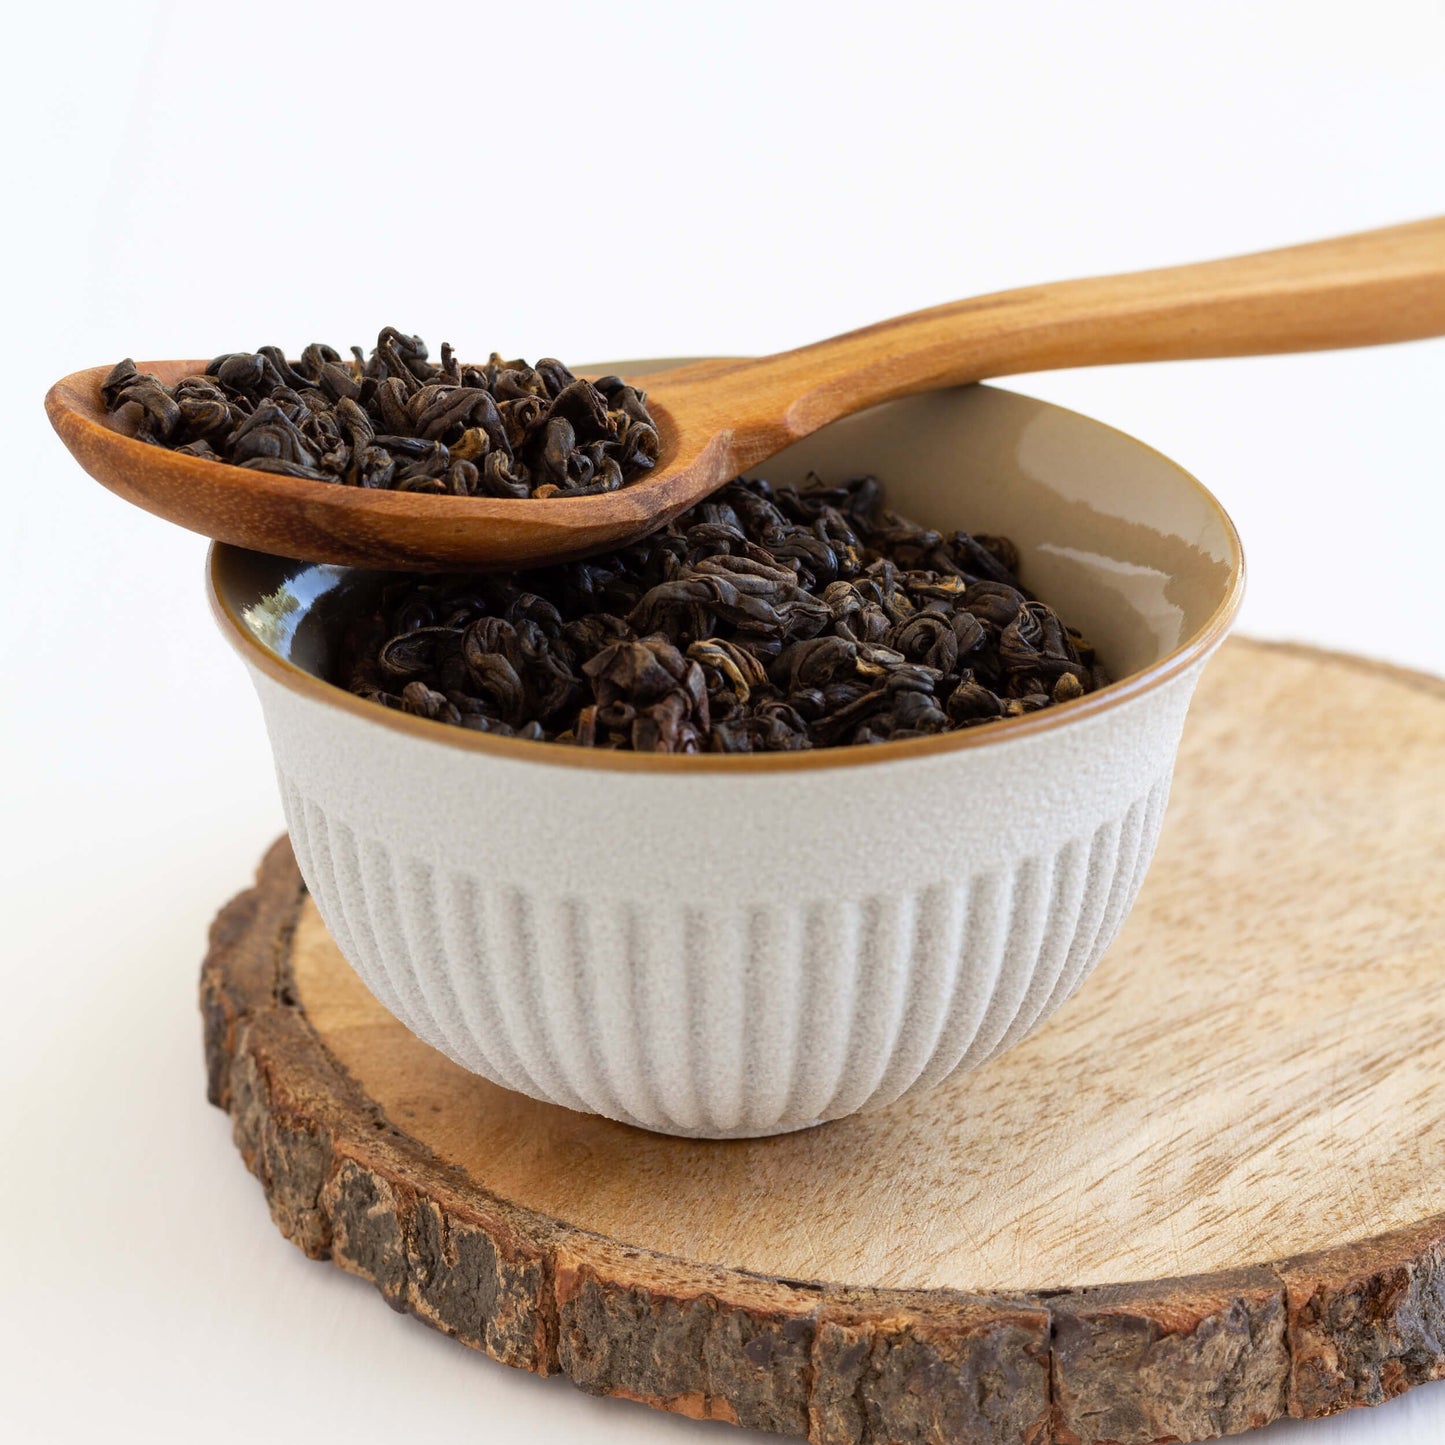 Amber Autumn Oolong shown in close up as loose tea leaves in a wooden spoon, perched across a small white cup full of tea leaves, displayed on a wooden coaster.